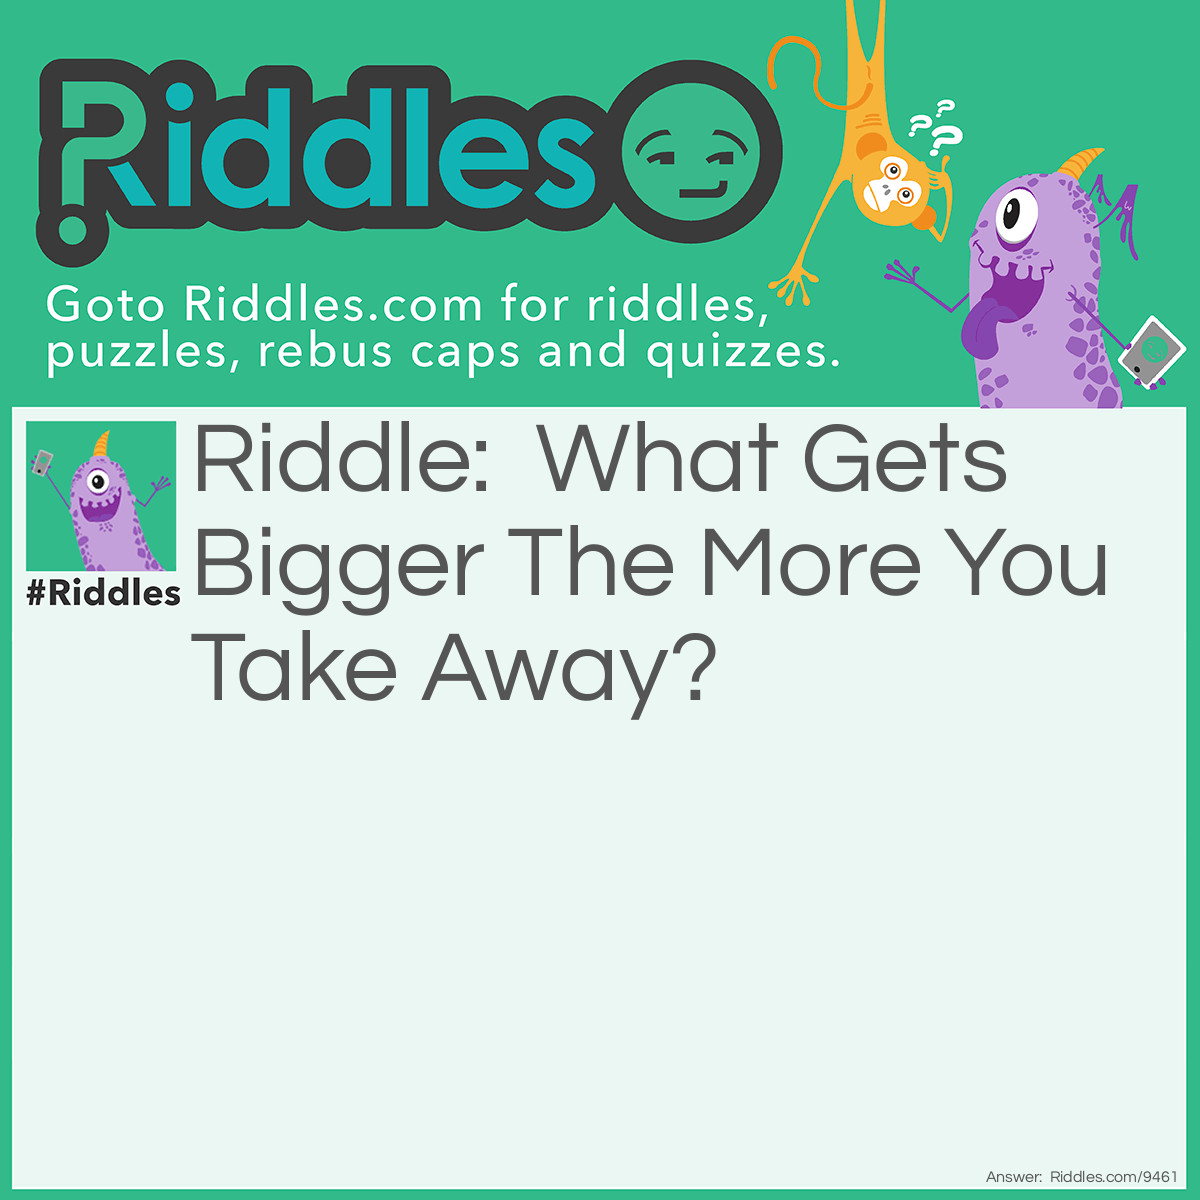 Riddle: What Gets Bigger The More You Take Away? Answer: A hole.